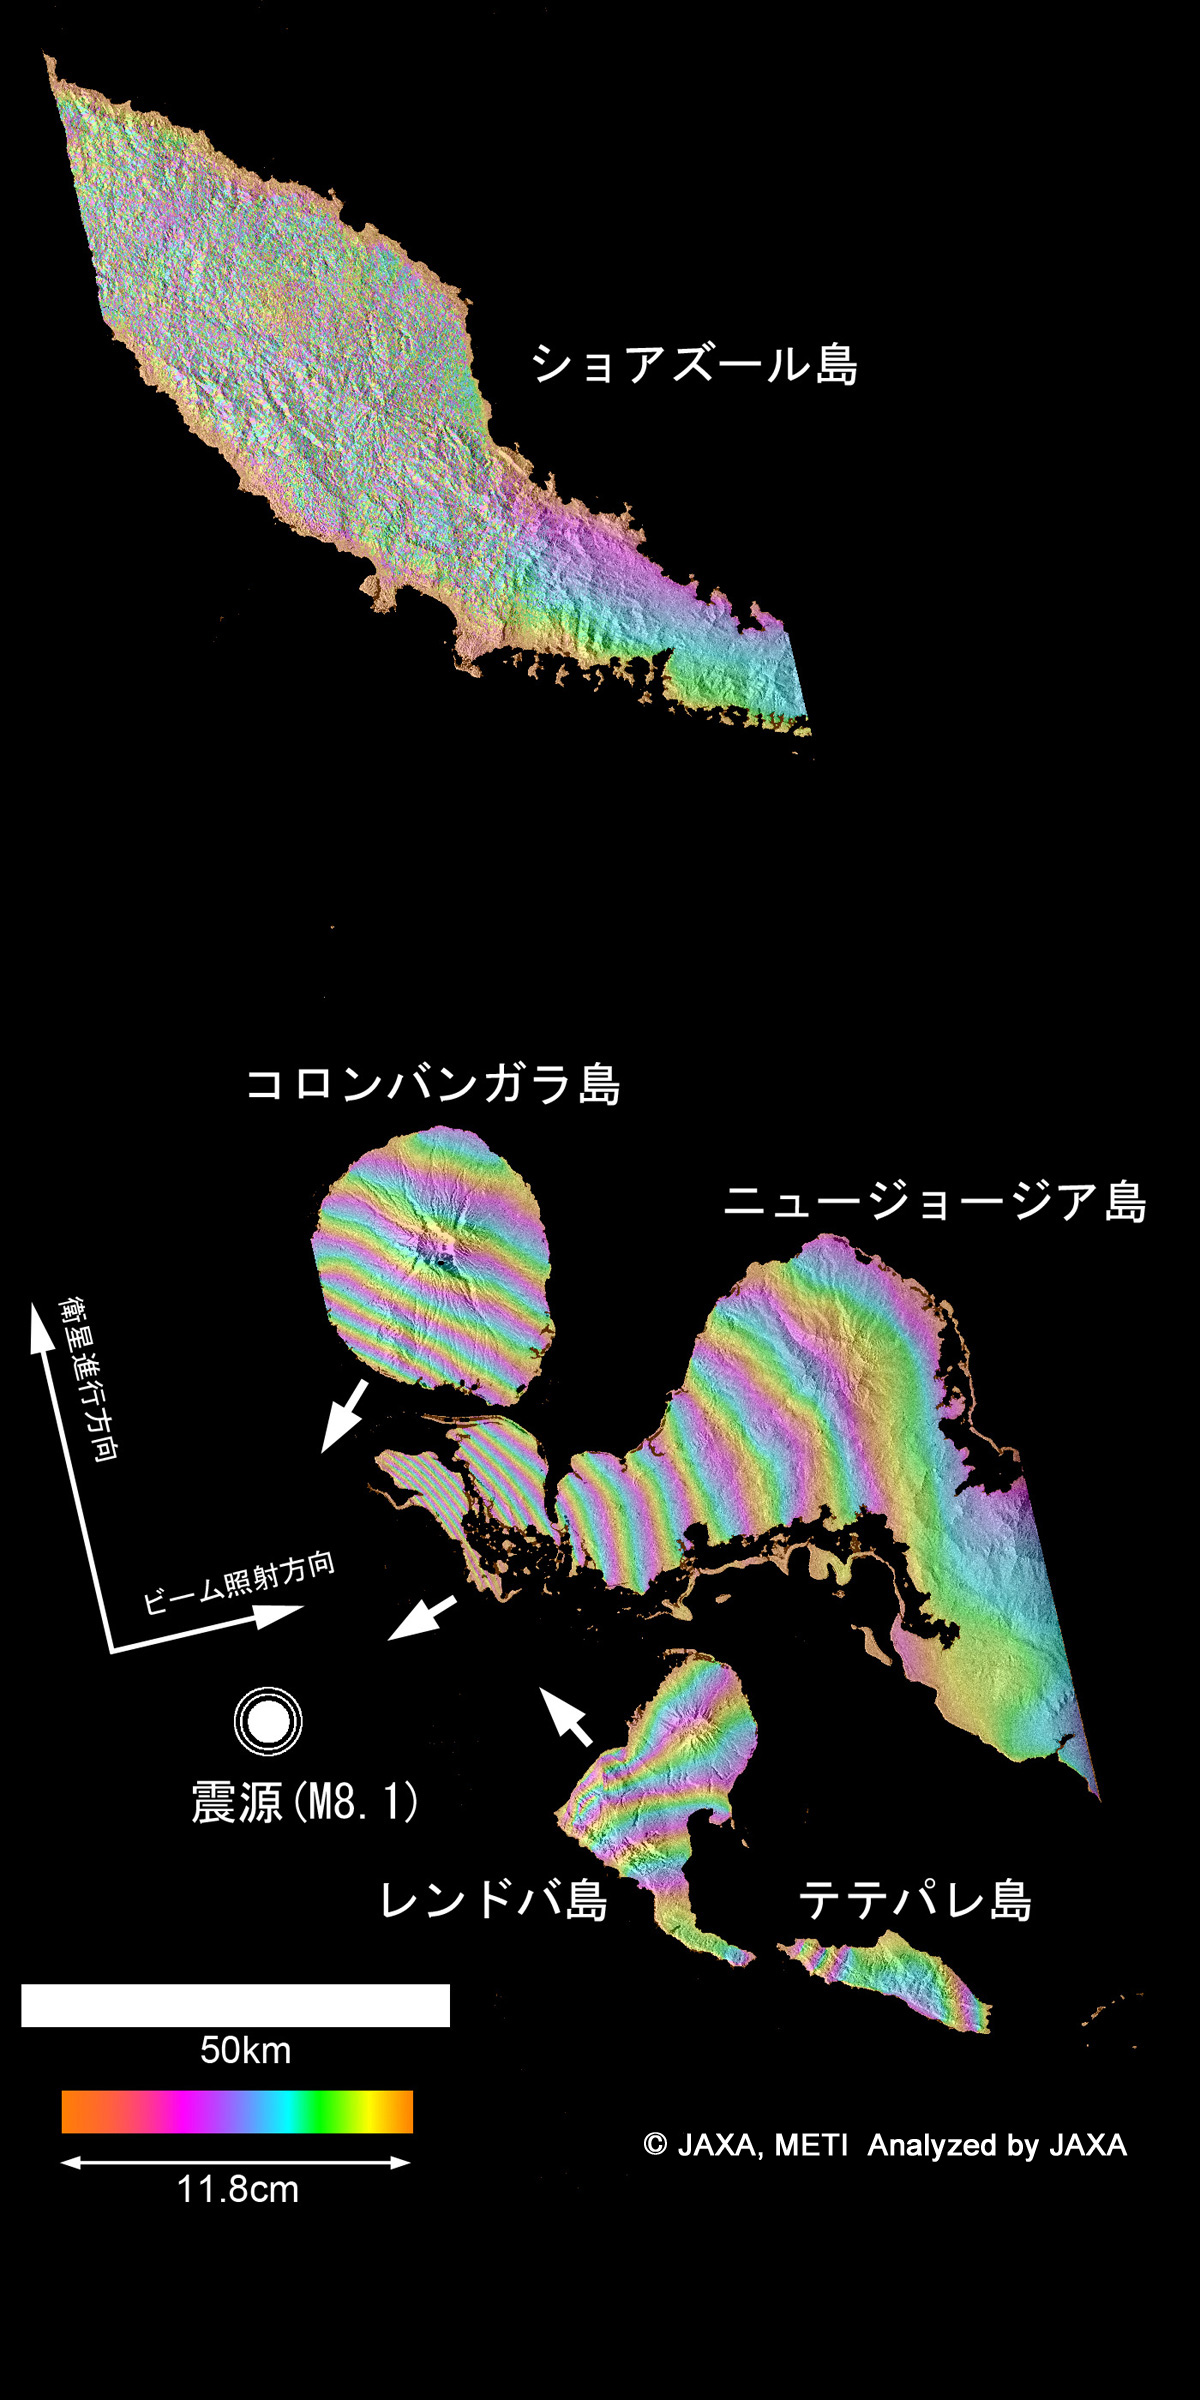 Japan Aerospace Exploration Agency succeeded to detect the surface deformations at the New Georgia islands, i.e., the new Georgia, Kolombangara, Rendoba, and Tetepare island of Solomon islands, caused by the M8.1 Earthquake occurred on April 2 using the PALSAR Interferometry (Fig. 1).